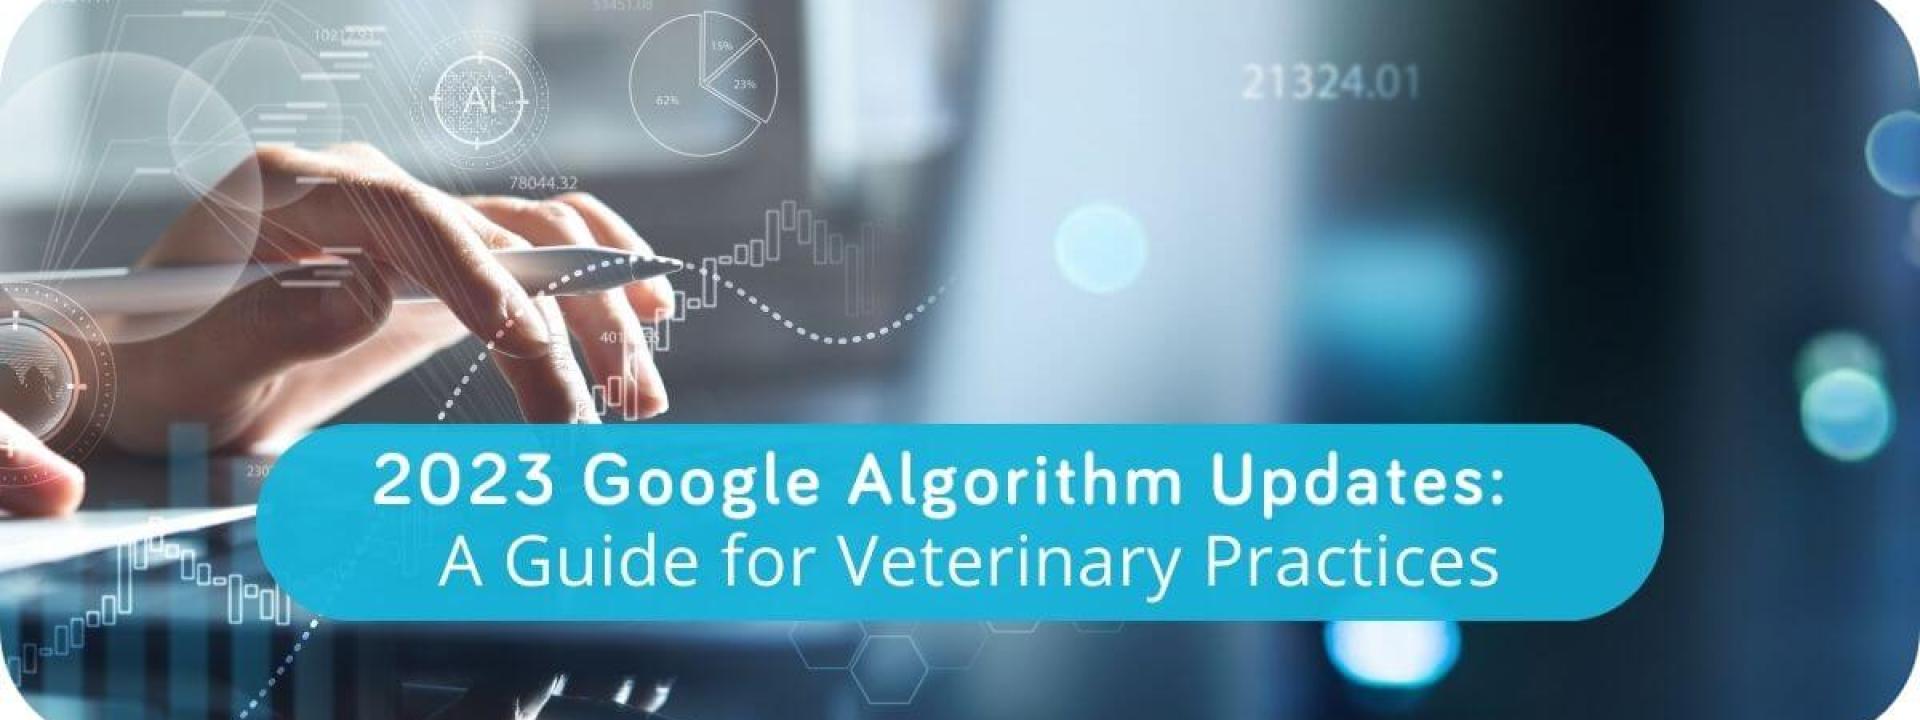 2023 Google Algorithm Updates: A Guide for Veterinary Practices